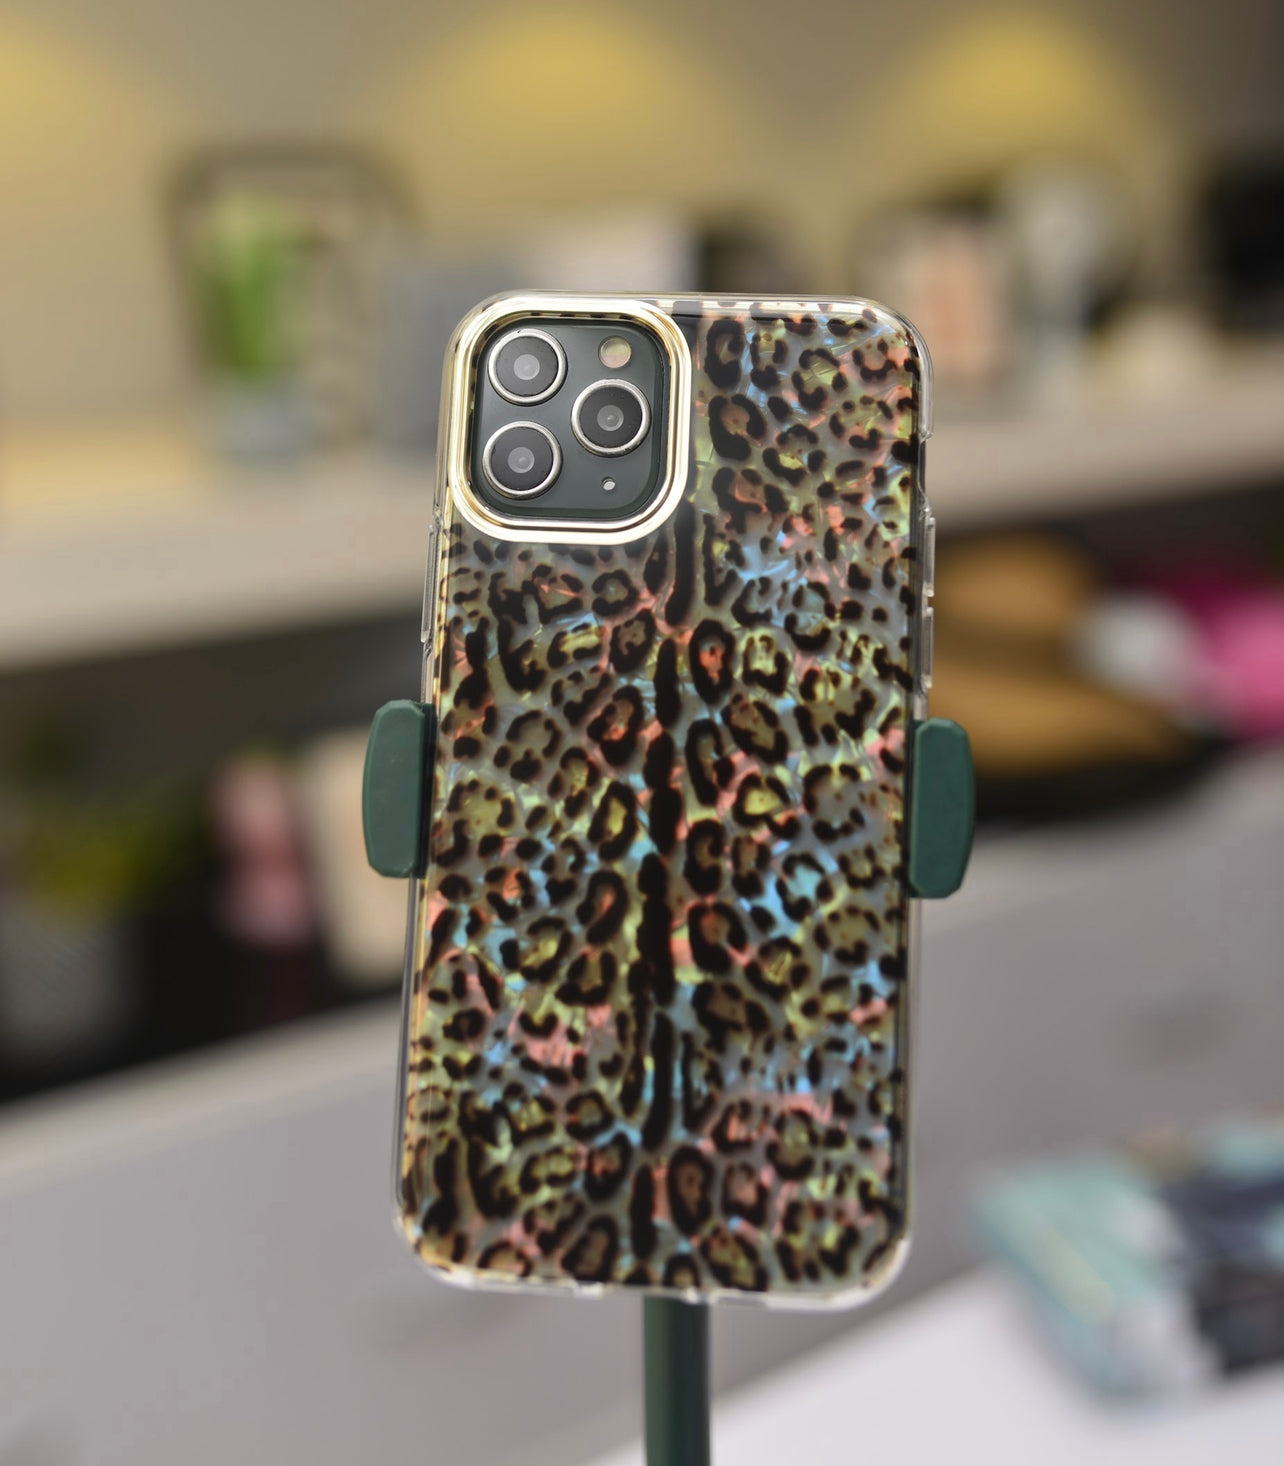 Leopard Print Case For IPhone 11 Pro